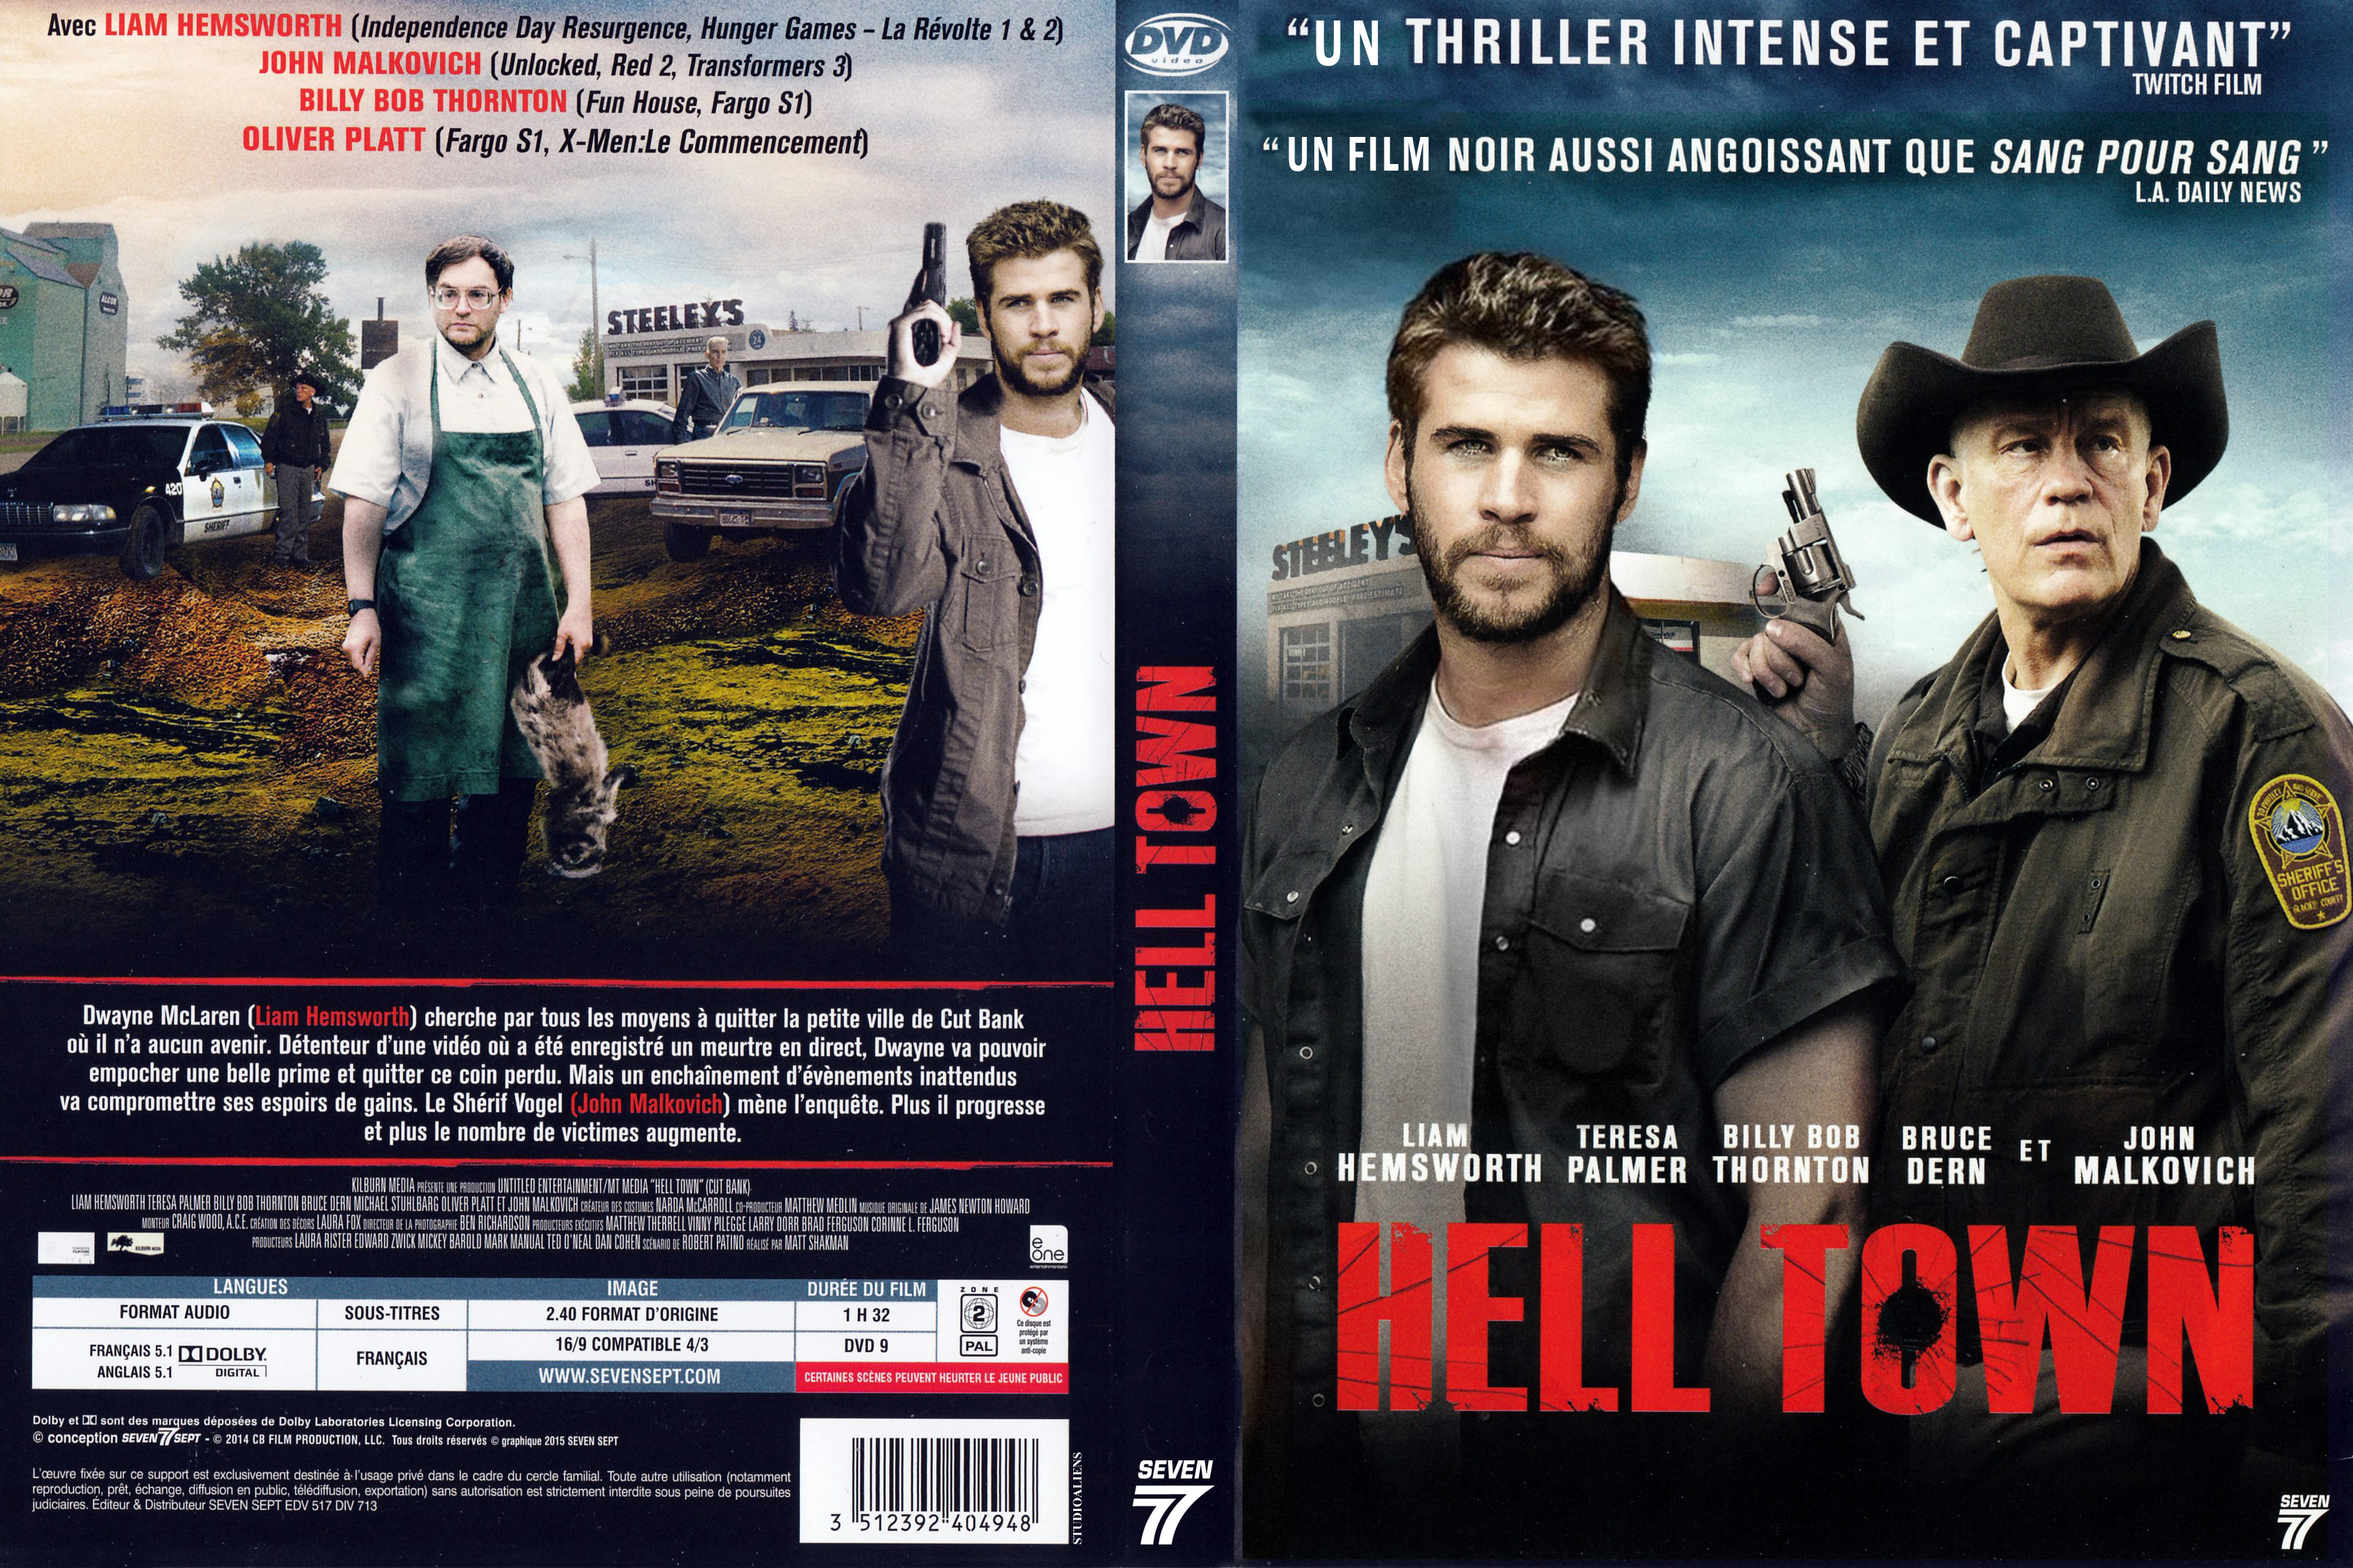 Jaquette DVD Hell Town